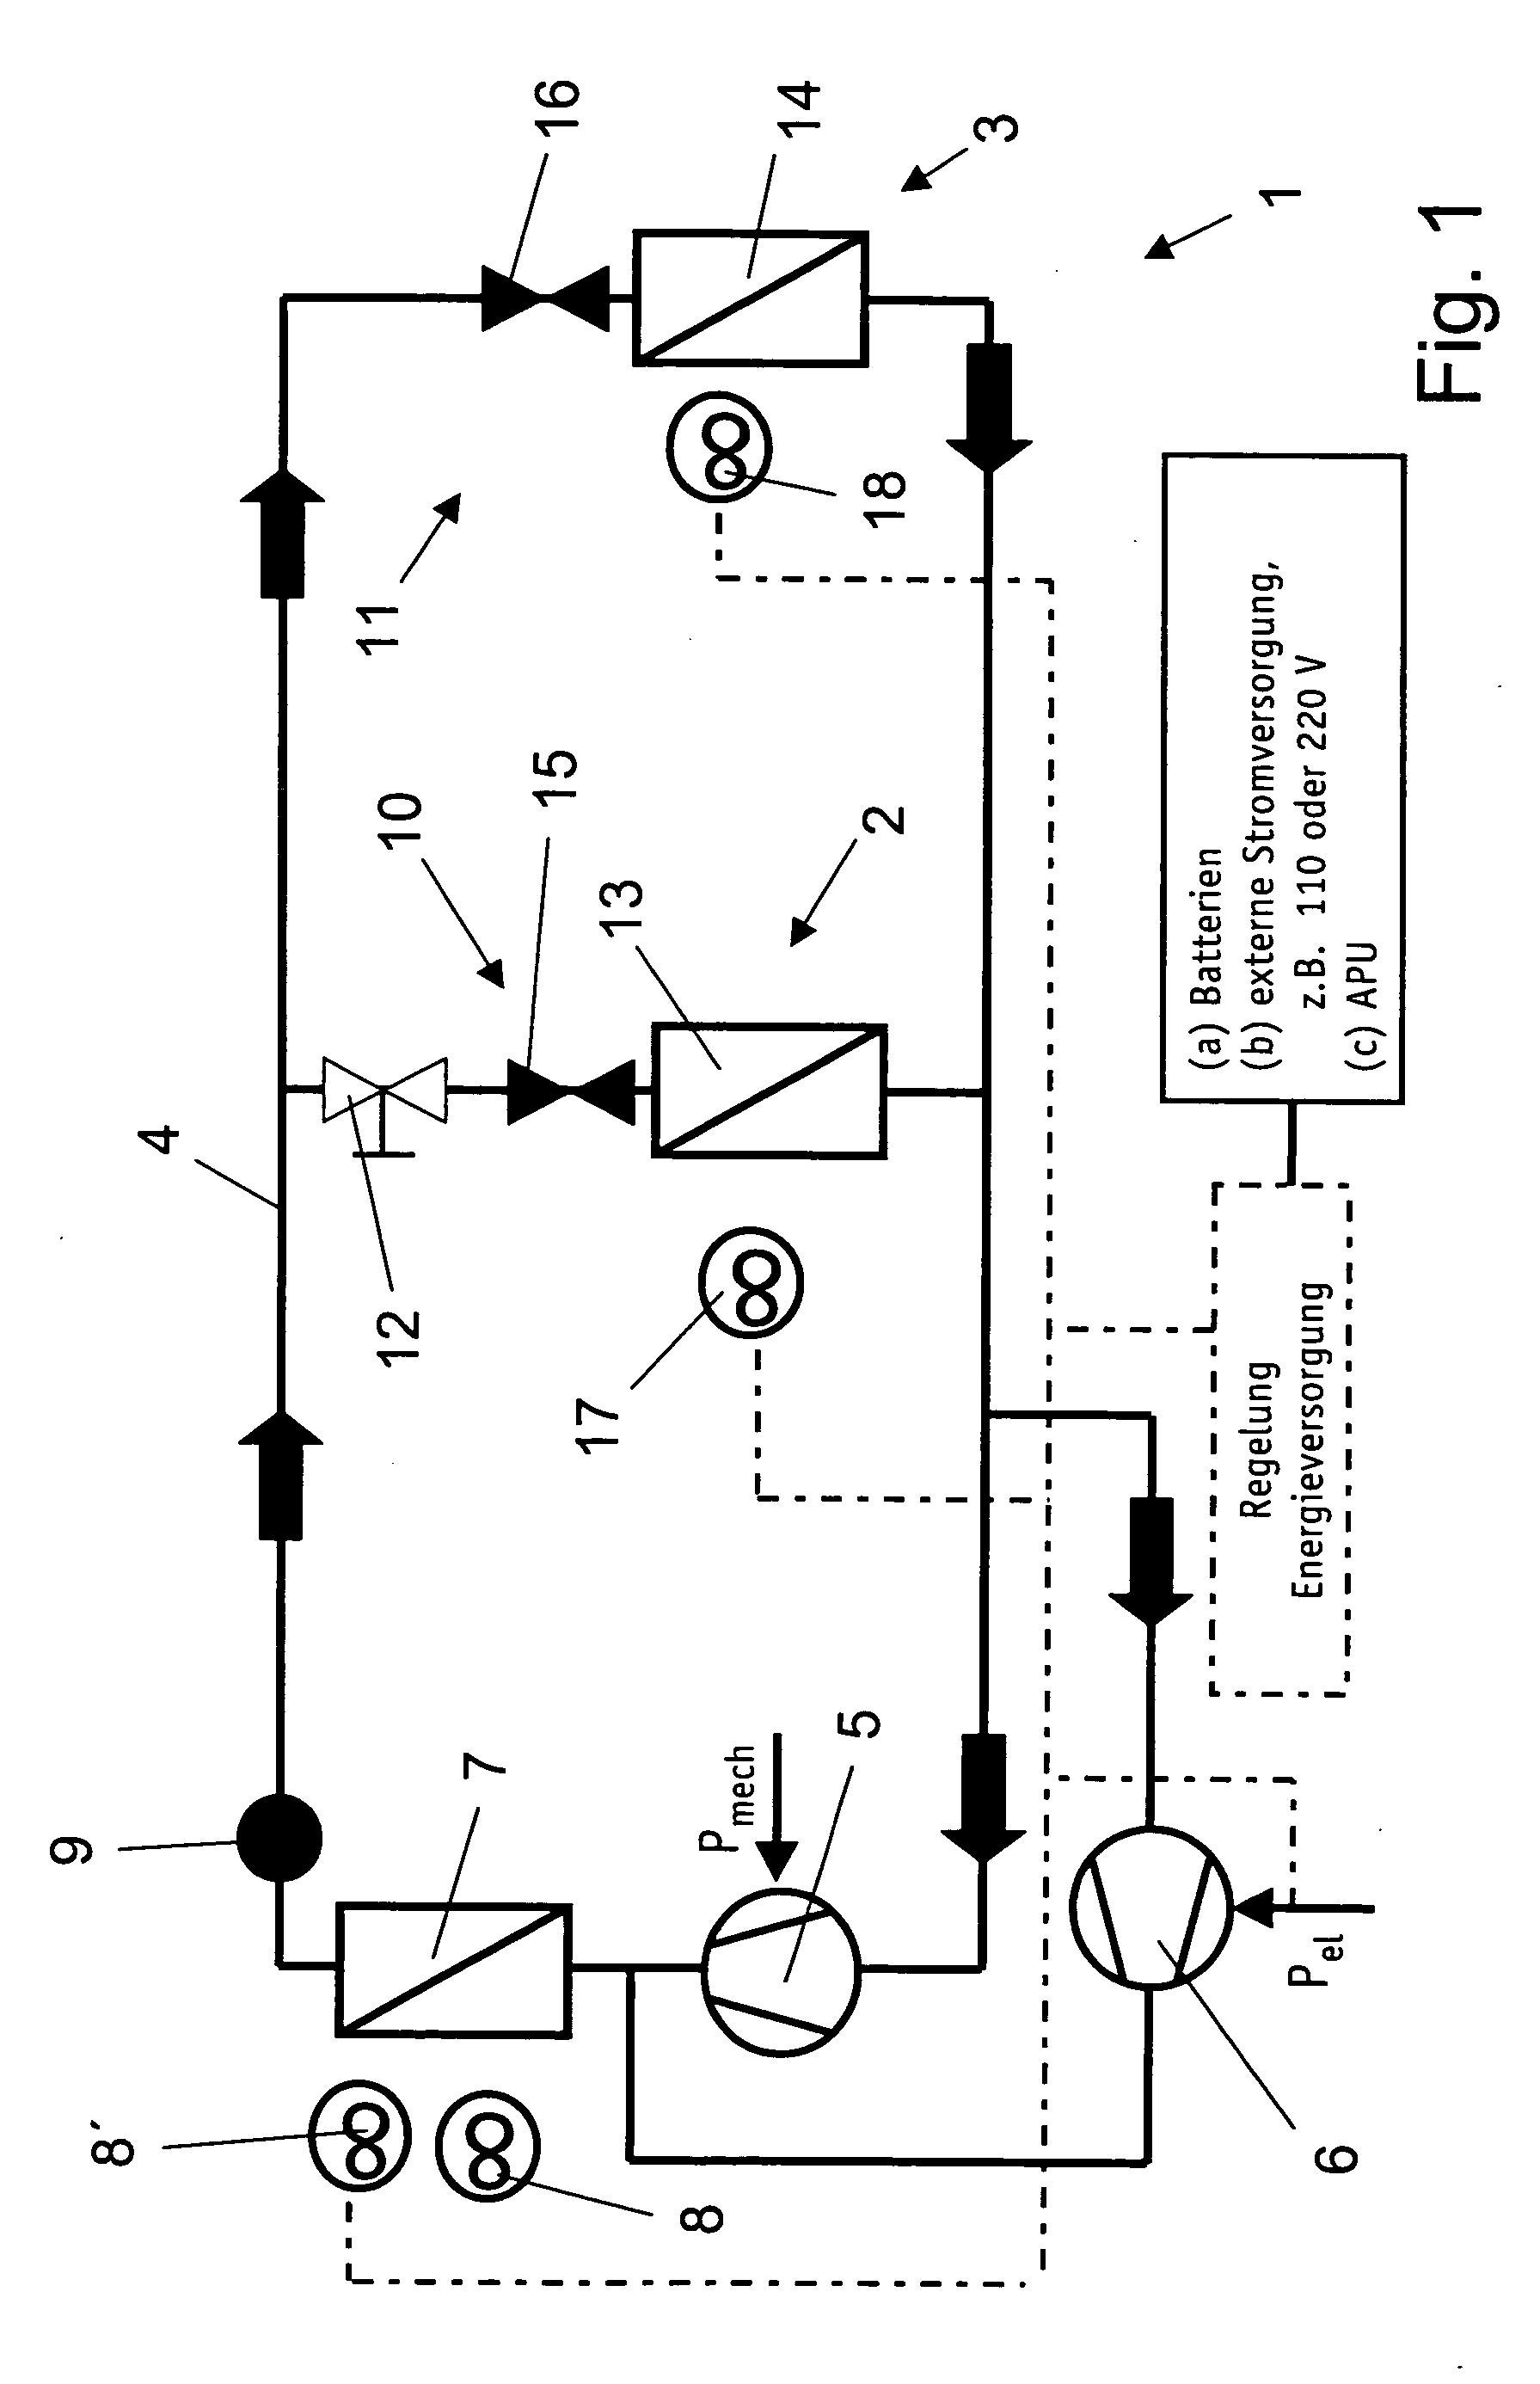 Stationary vehicle air conditioning system and method